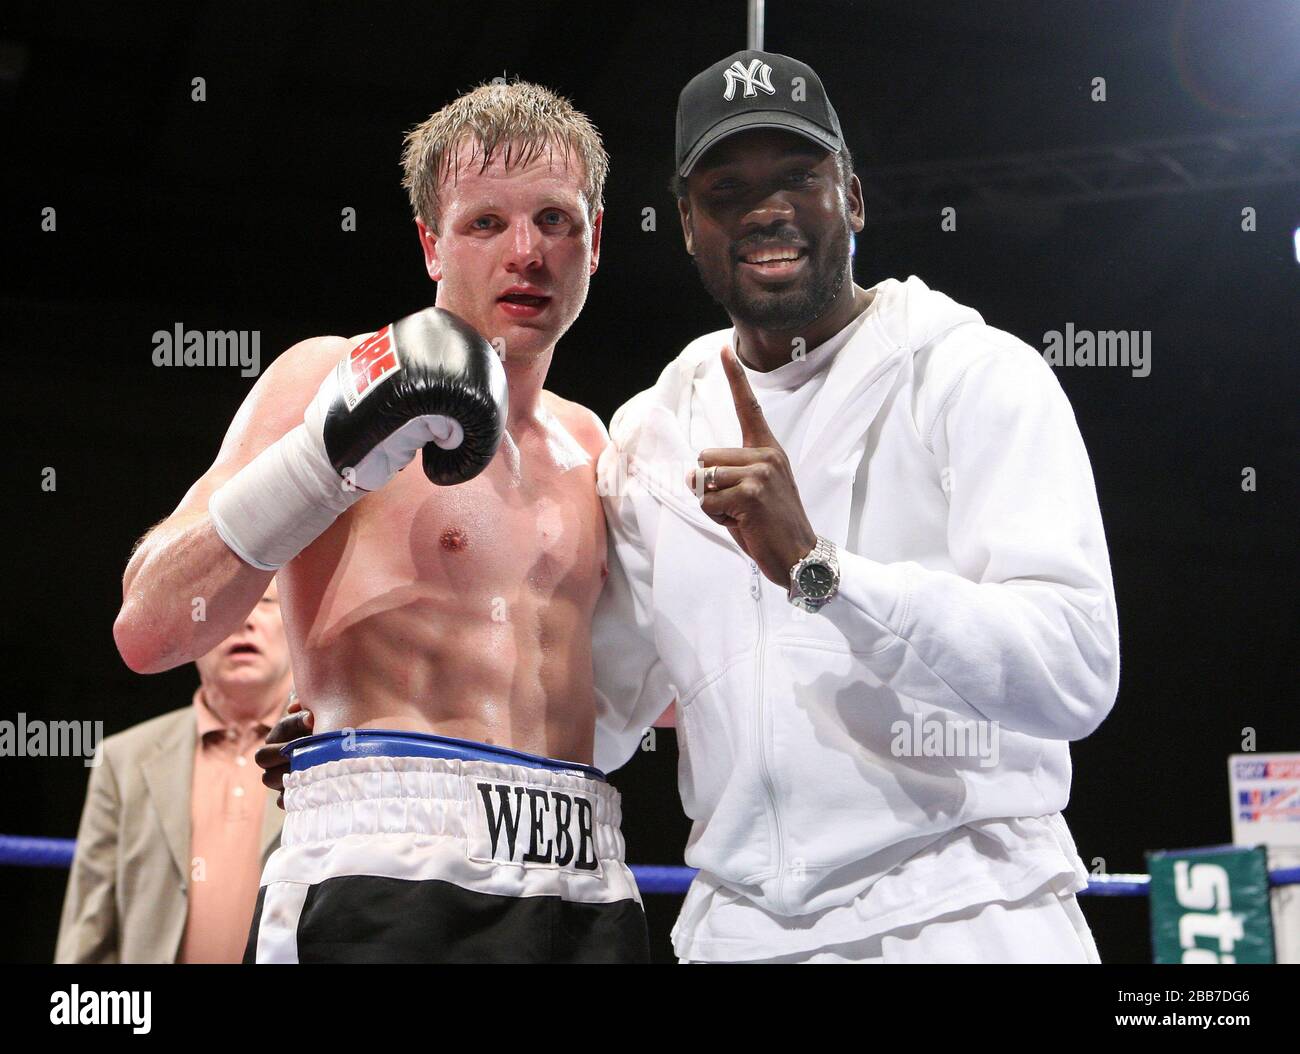 Sam Webb (Isle of Dogs, black shorts) defeats Max Maxwell (Birmingham, white shorts) in a Middleweight boxing contest at Newham Leisure Centre, London Stock Photo